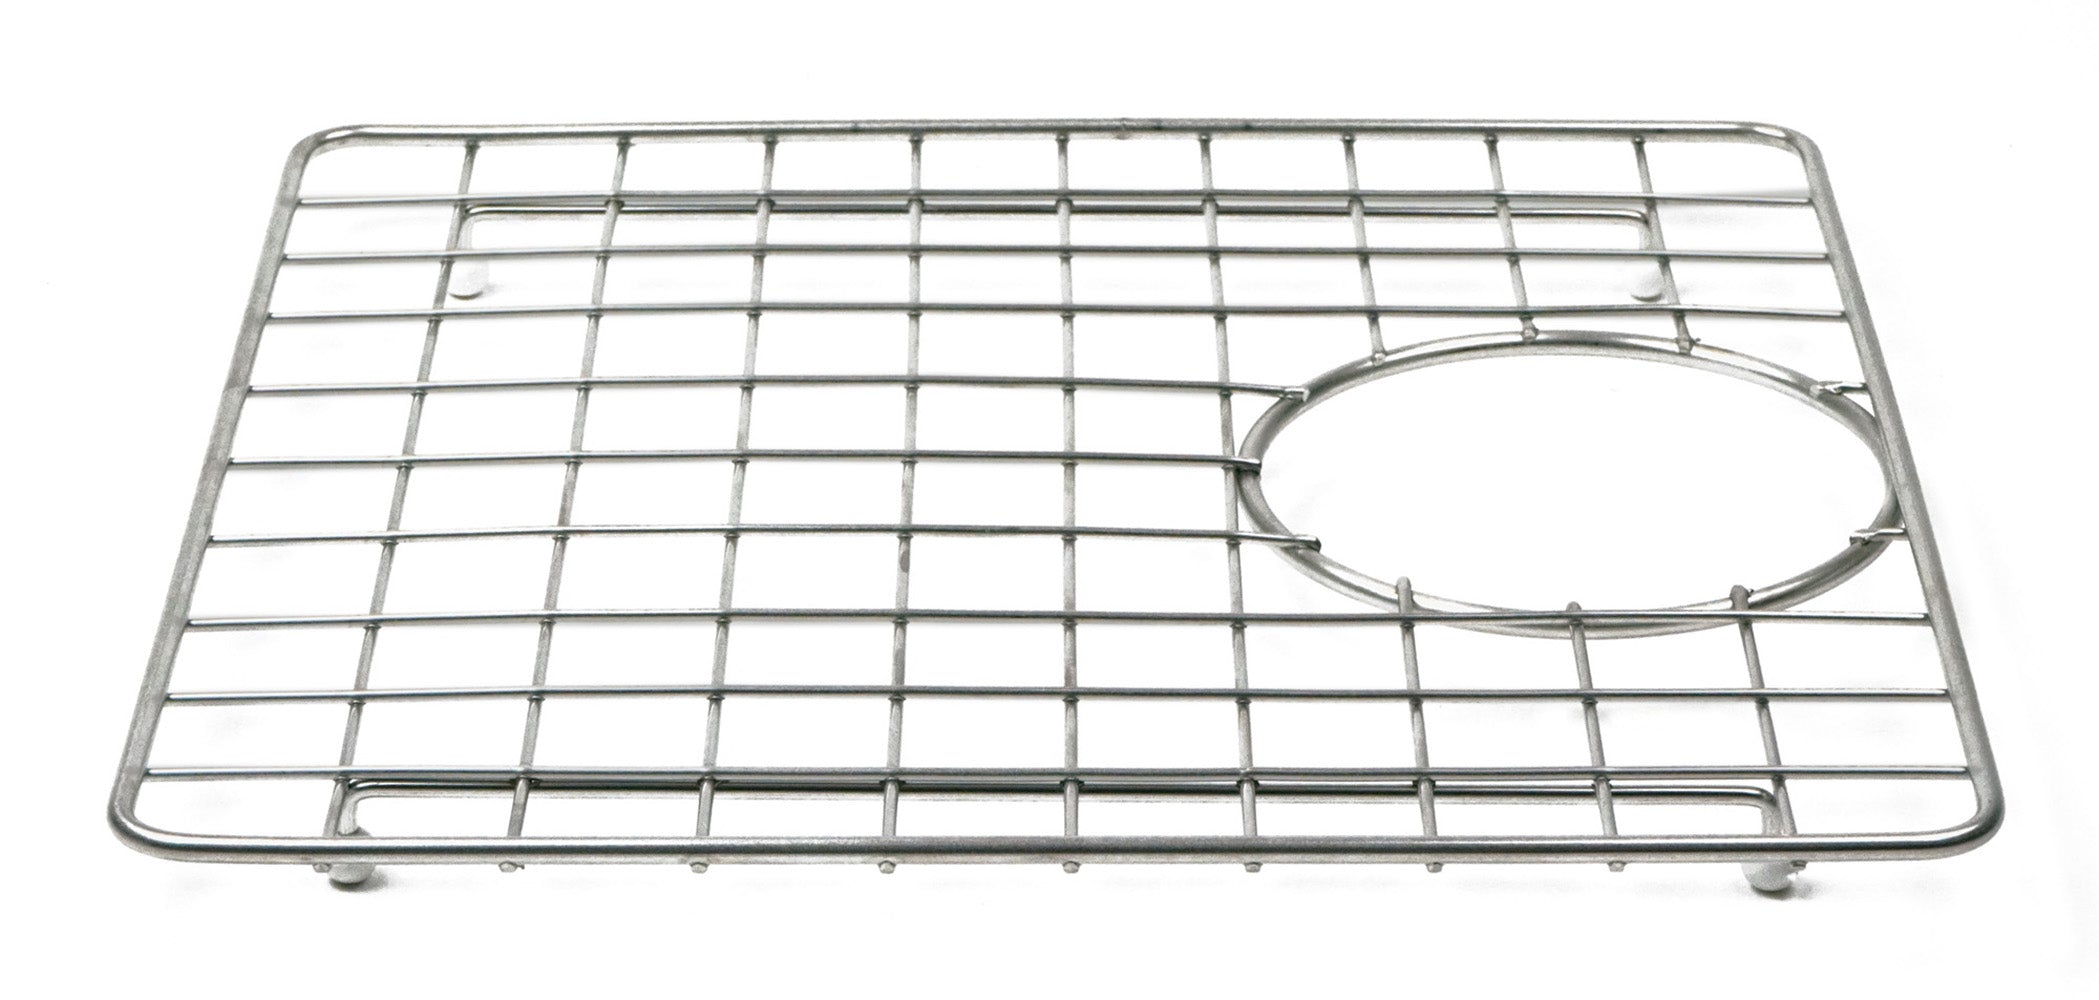 ALFI Brand - Stainless Steel Grid for AB3420DI and AB3420UM | ABGR3420